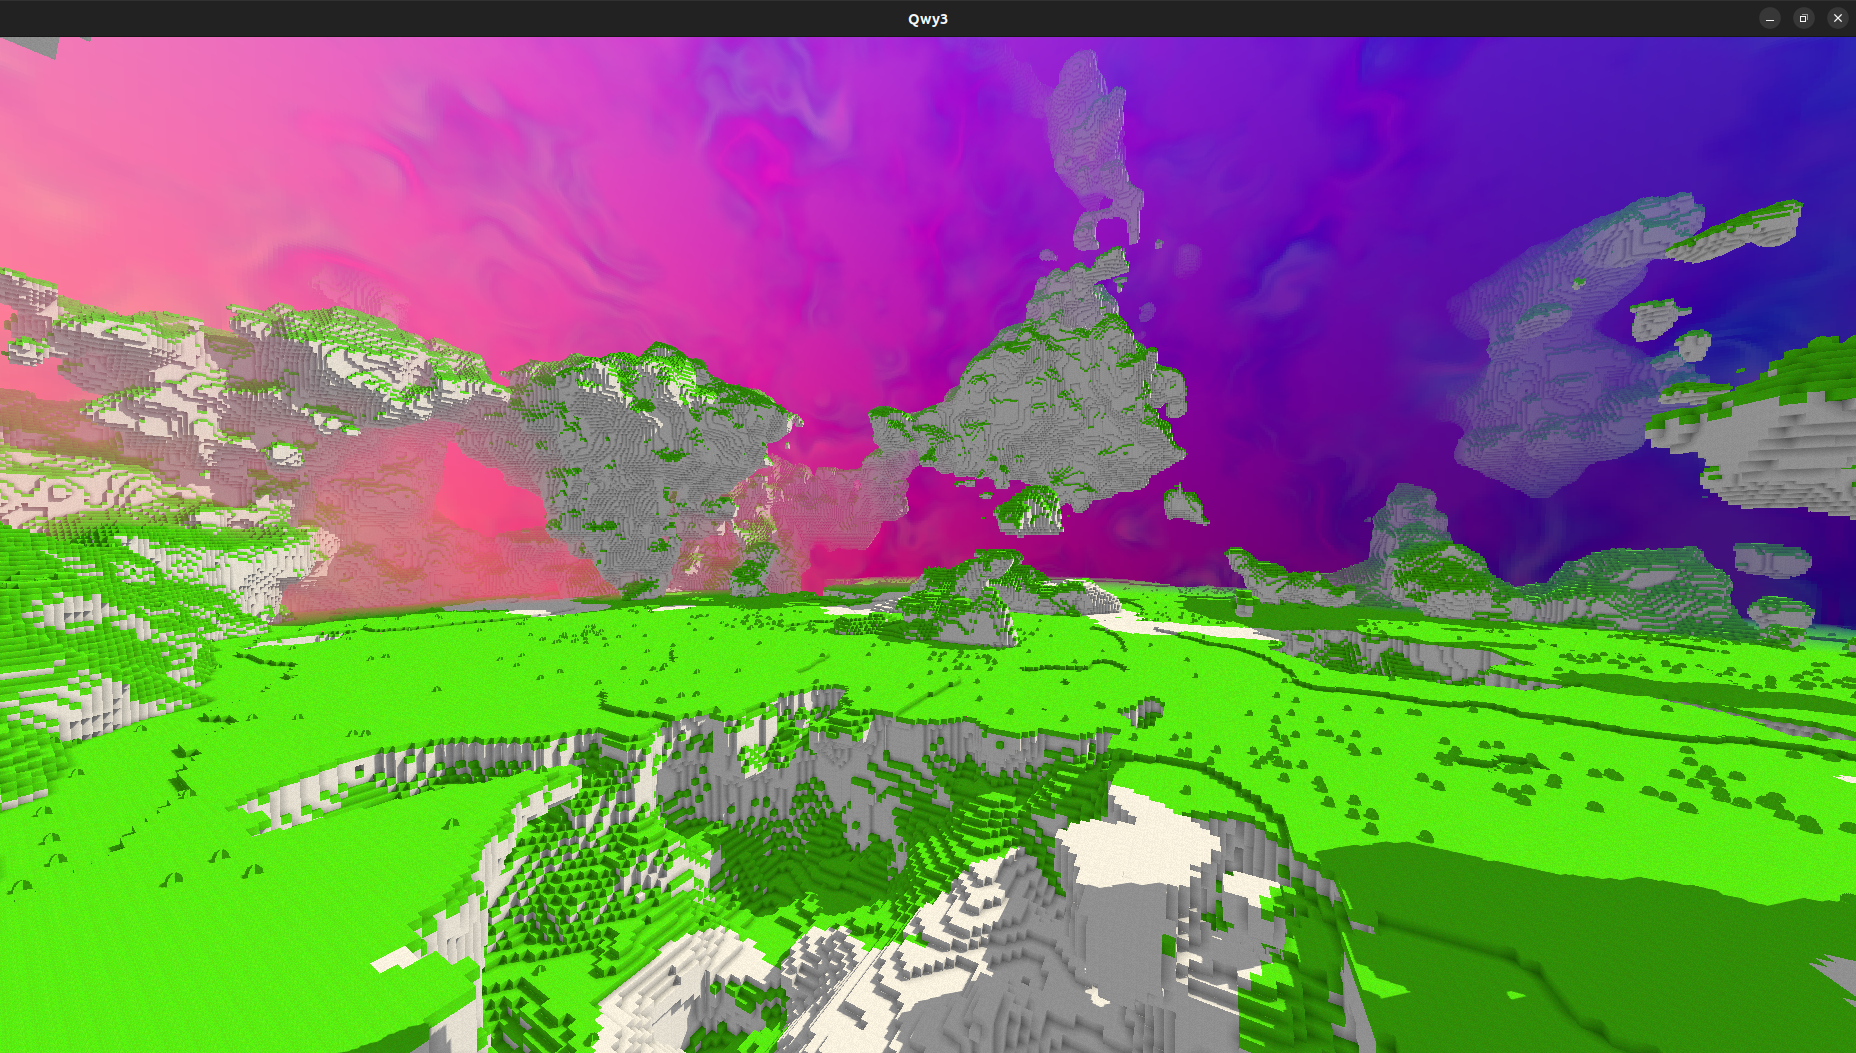 Image of some terrain generation mainly based on noise.